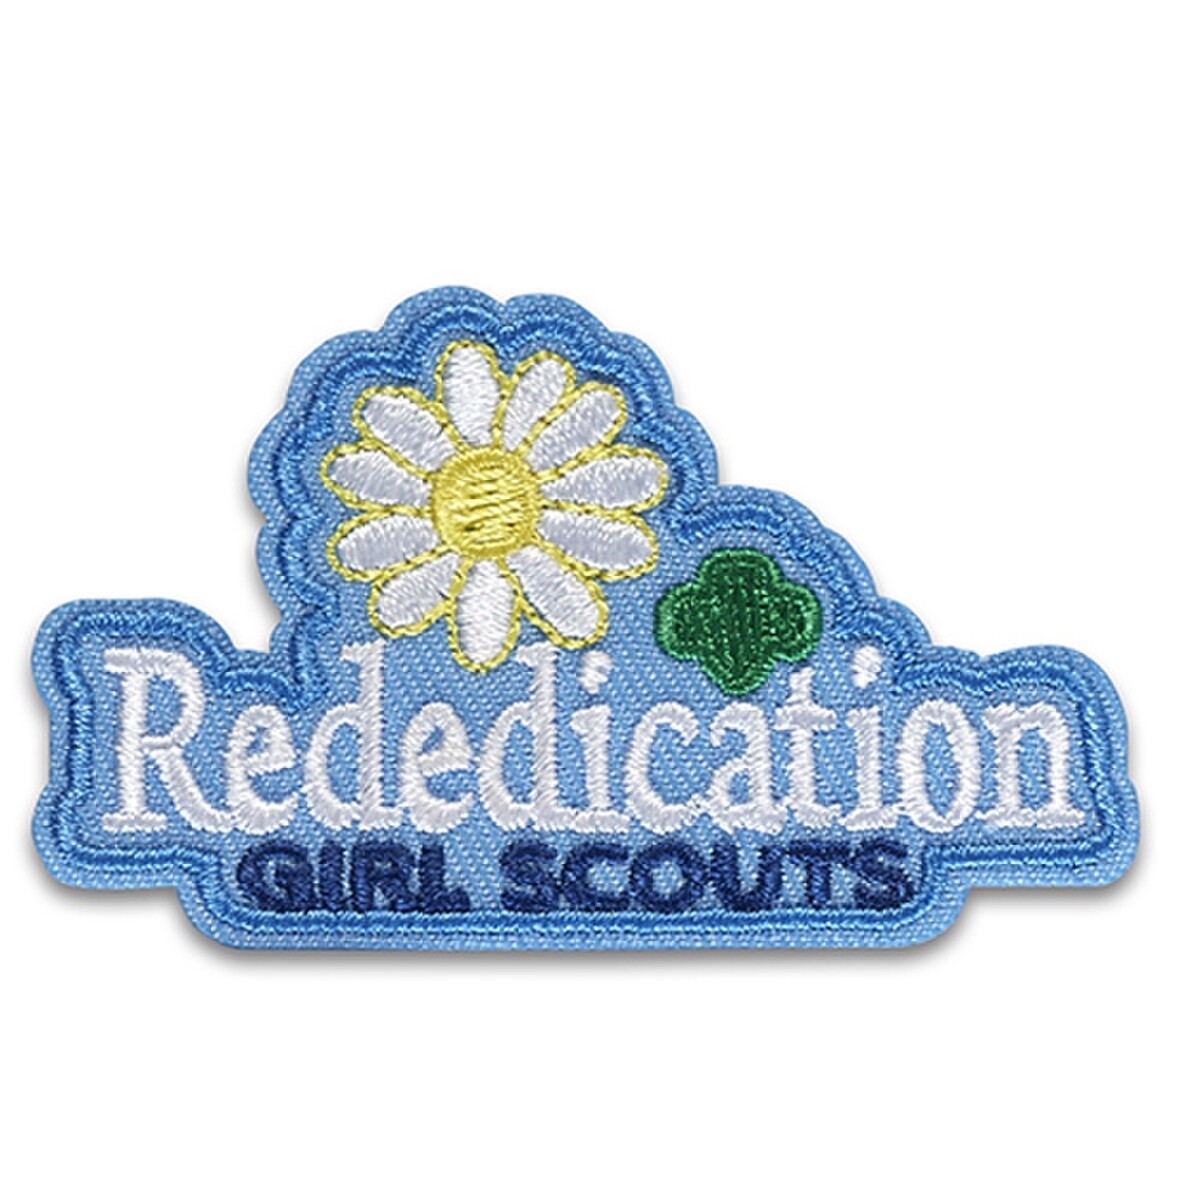 Iron-On Rededication Patch